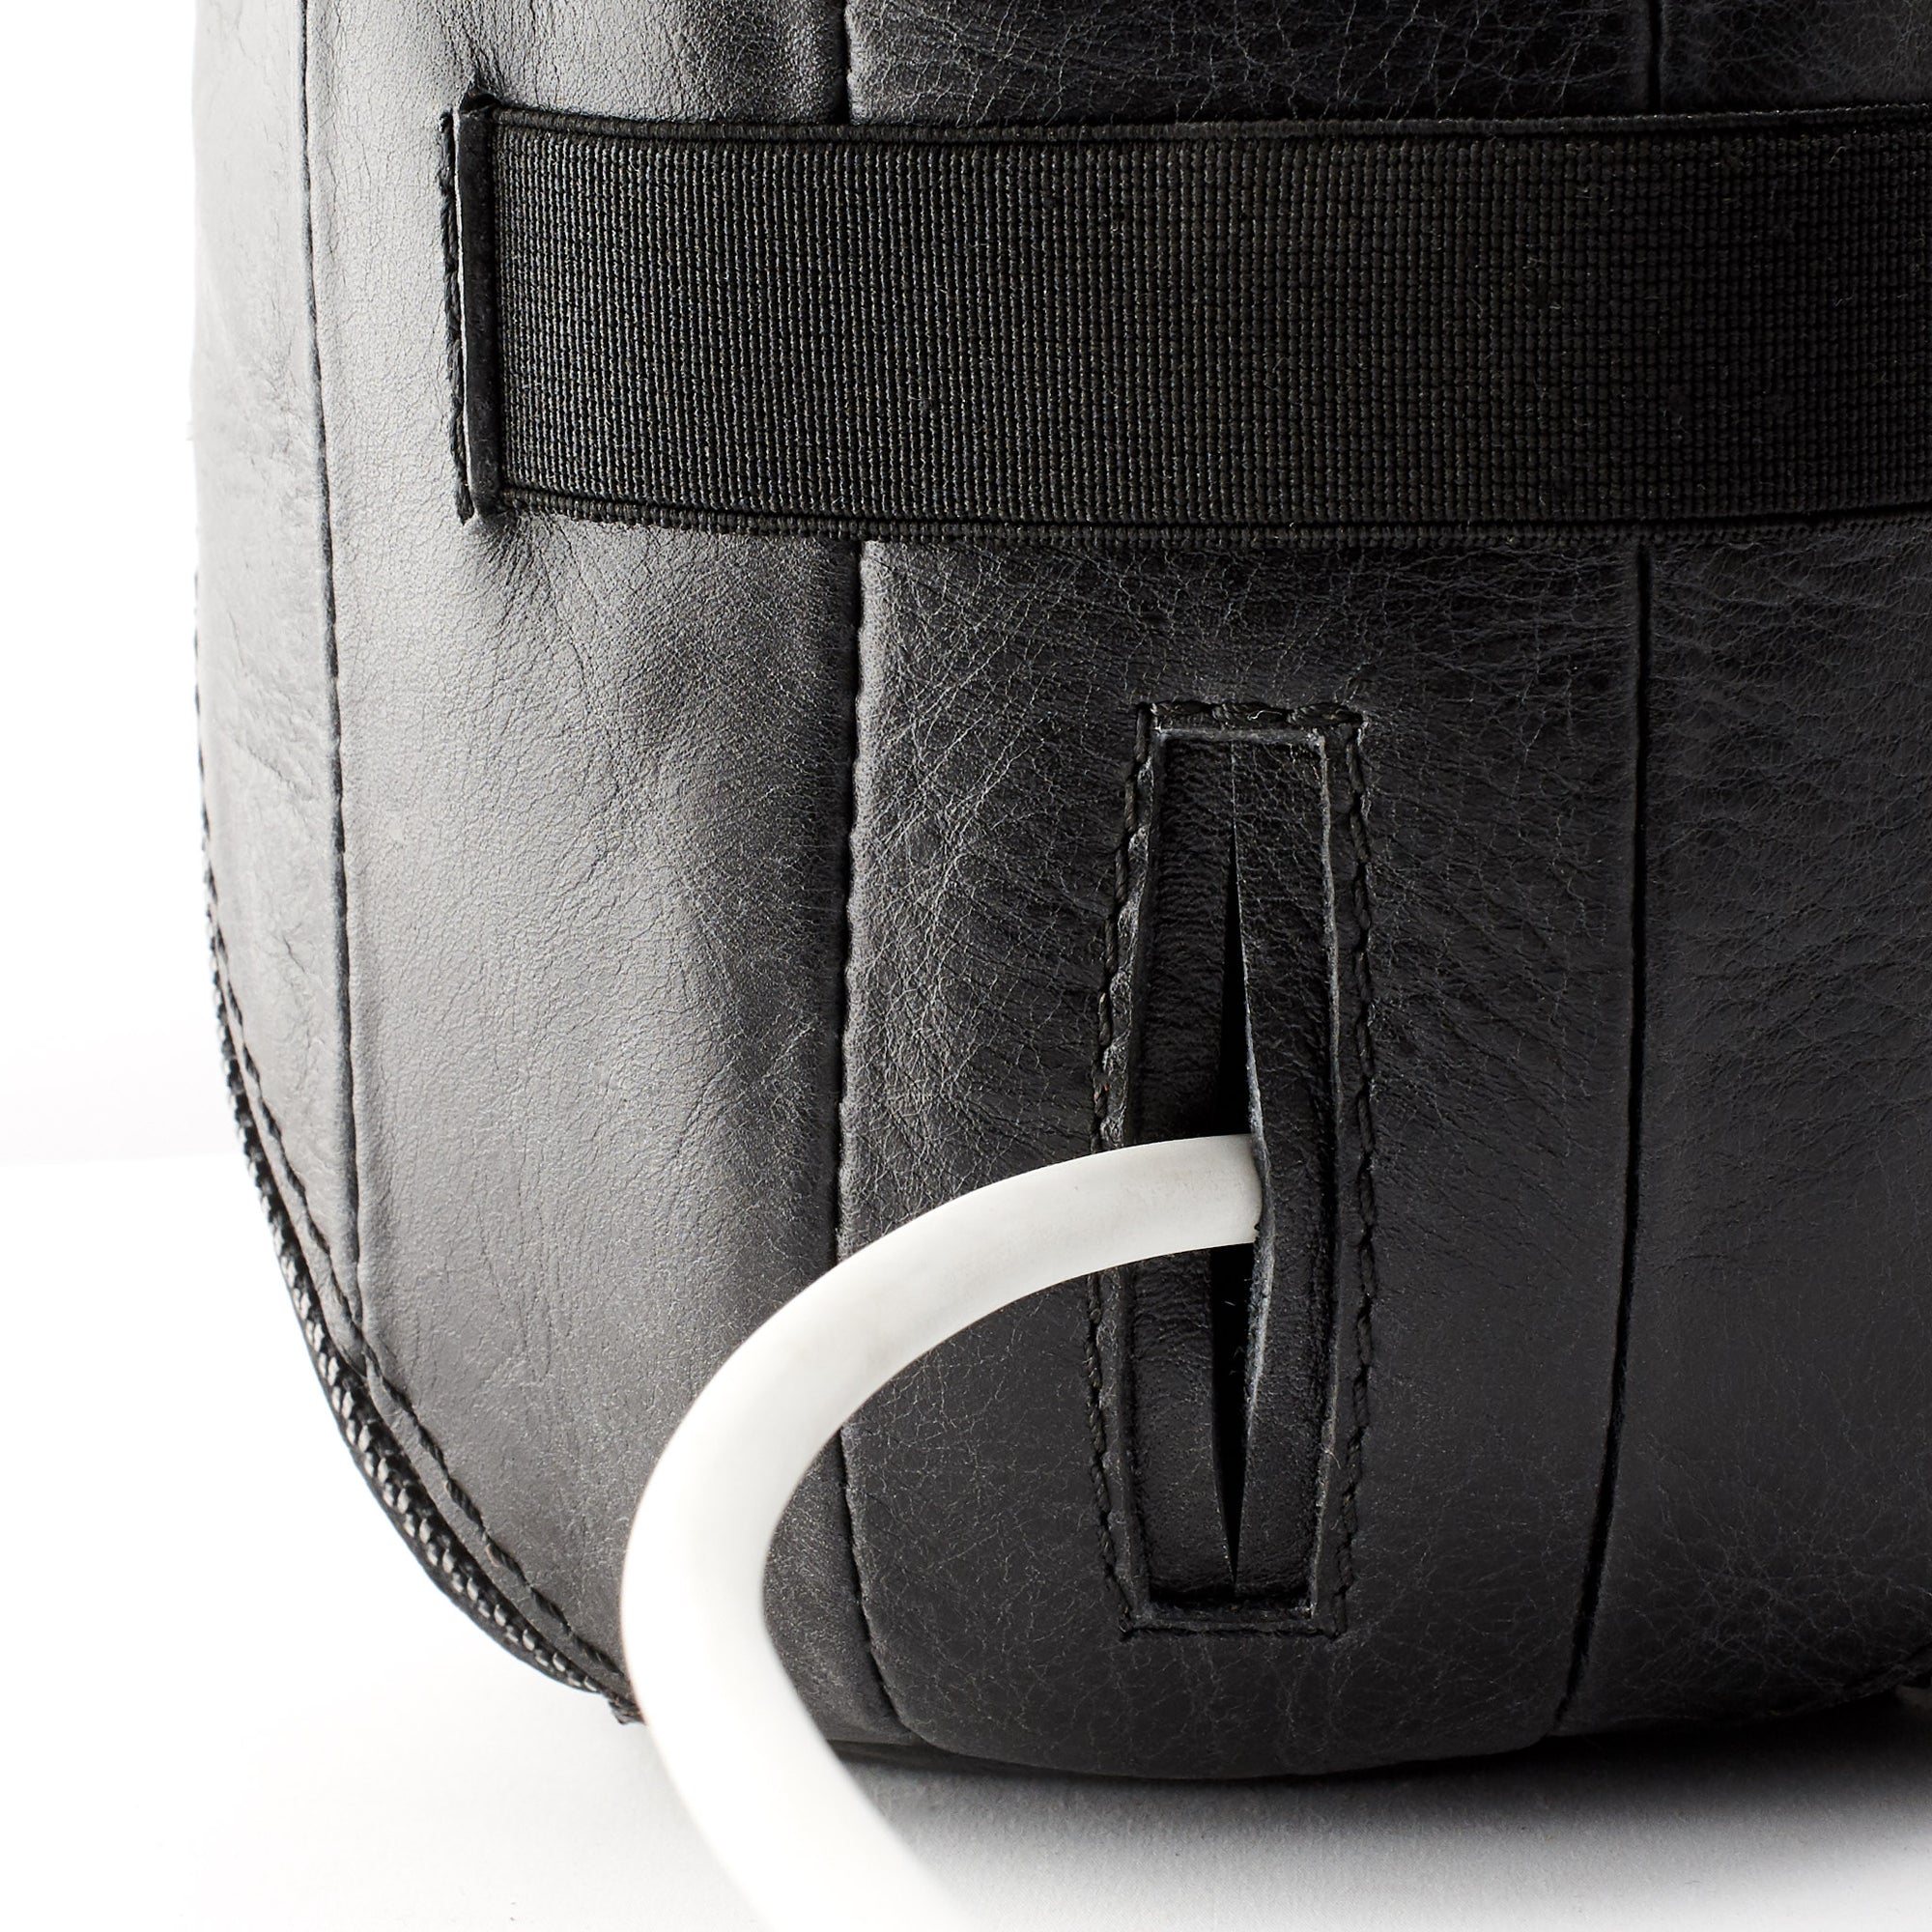 Detail. HomePod black leather travel carrying case.